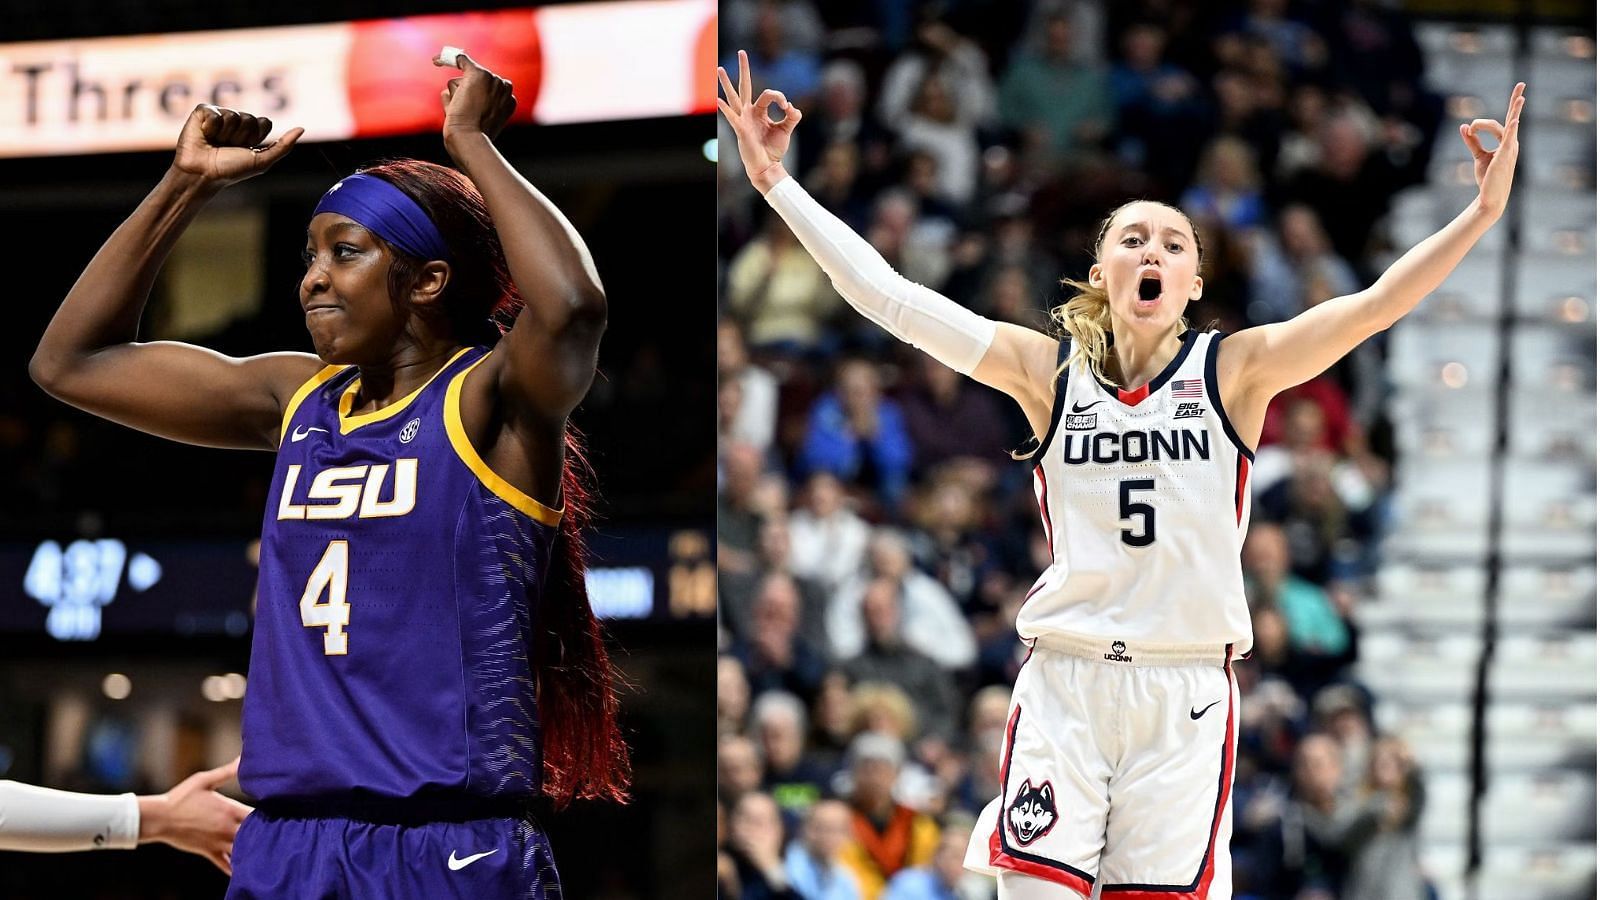 Preseason top two LSU and UConn have been somewhat overhyped this season.